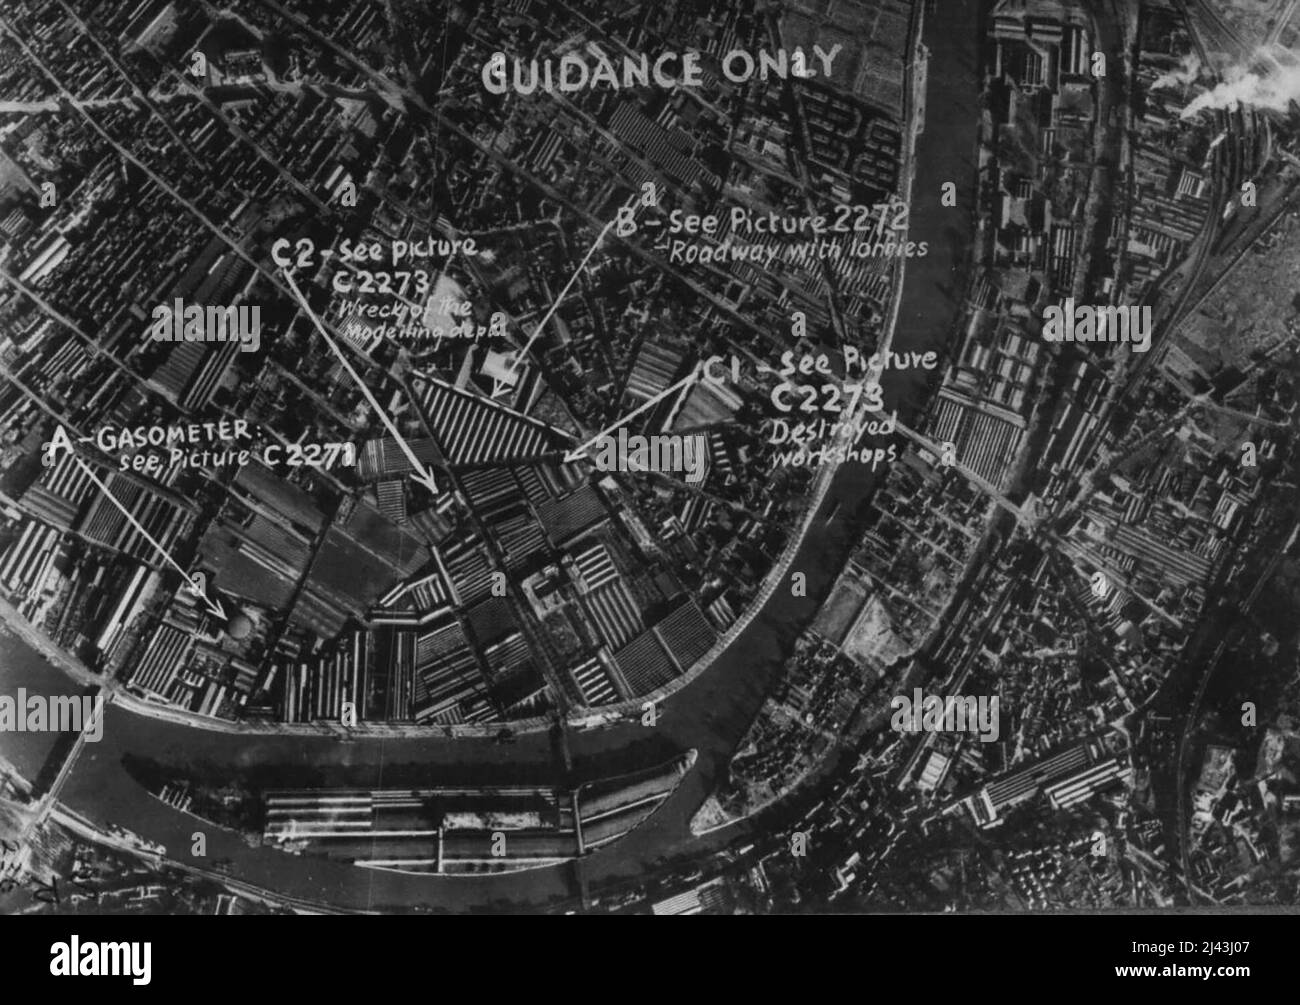 R.A.F. Bomb Paris Works (3.3.42) -- Before the raid - an air view of the area attacked taken beforehand. The Renault works at Biliancourt, a suburb of Pairs on the seine, which have been organized by the Germans to produce war supplies, such as tanks, aero-engines, lorries etc., were attacked by aircraft of bomber command, R.A.F. on the night of March 3, 1942. March 6, 1942. (Photo by British Official Photograph). Stock Photo